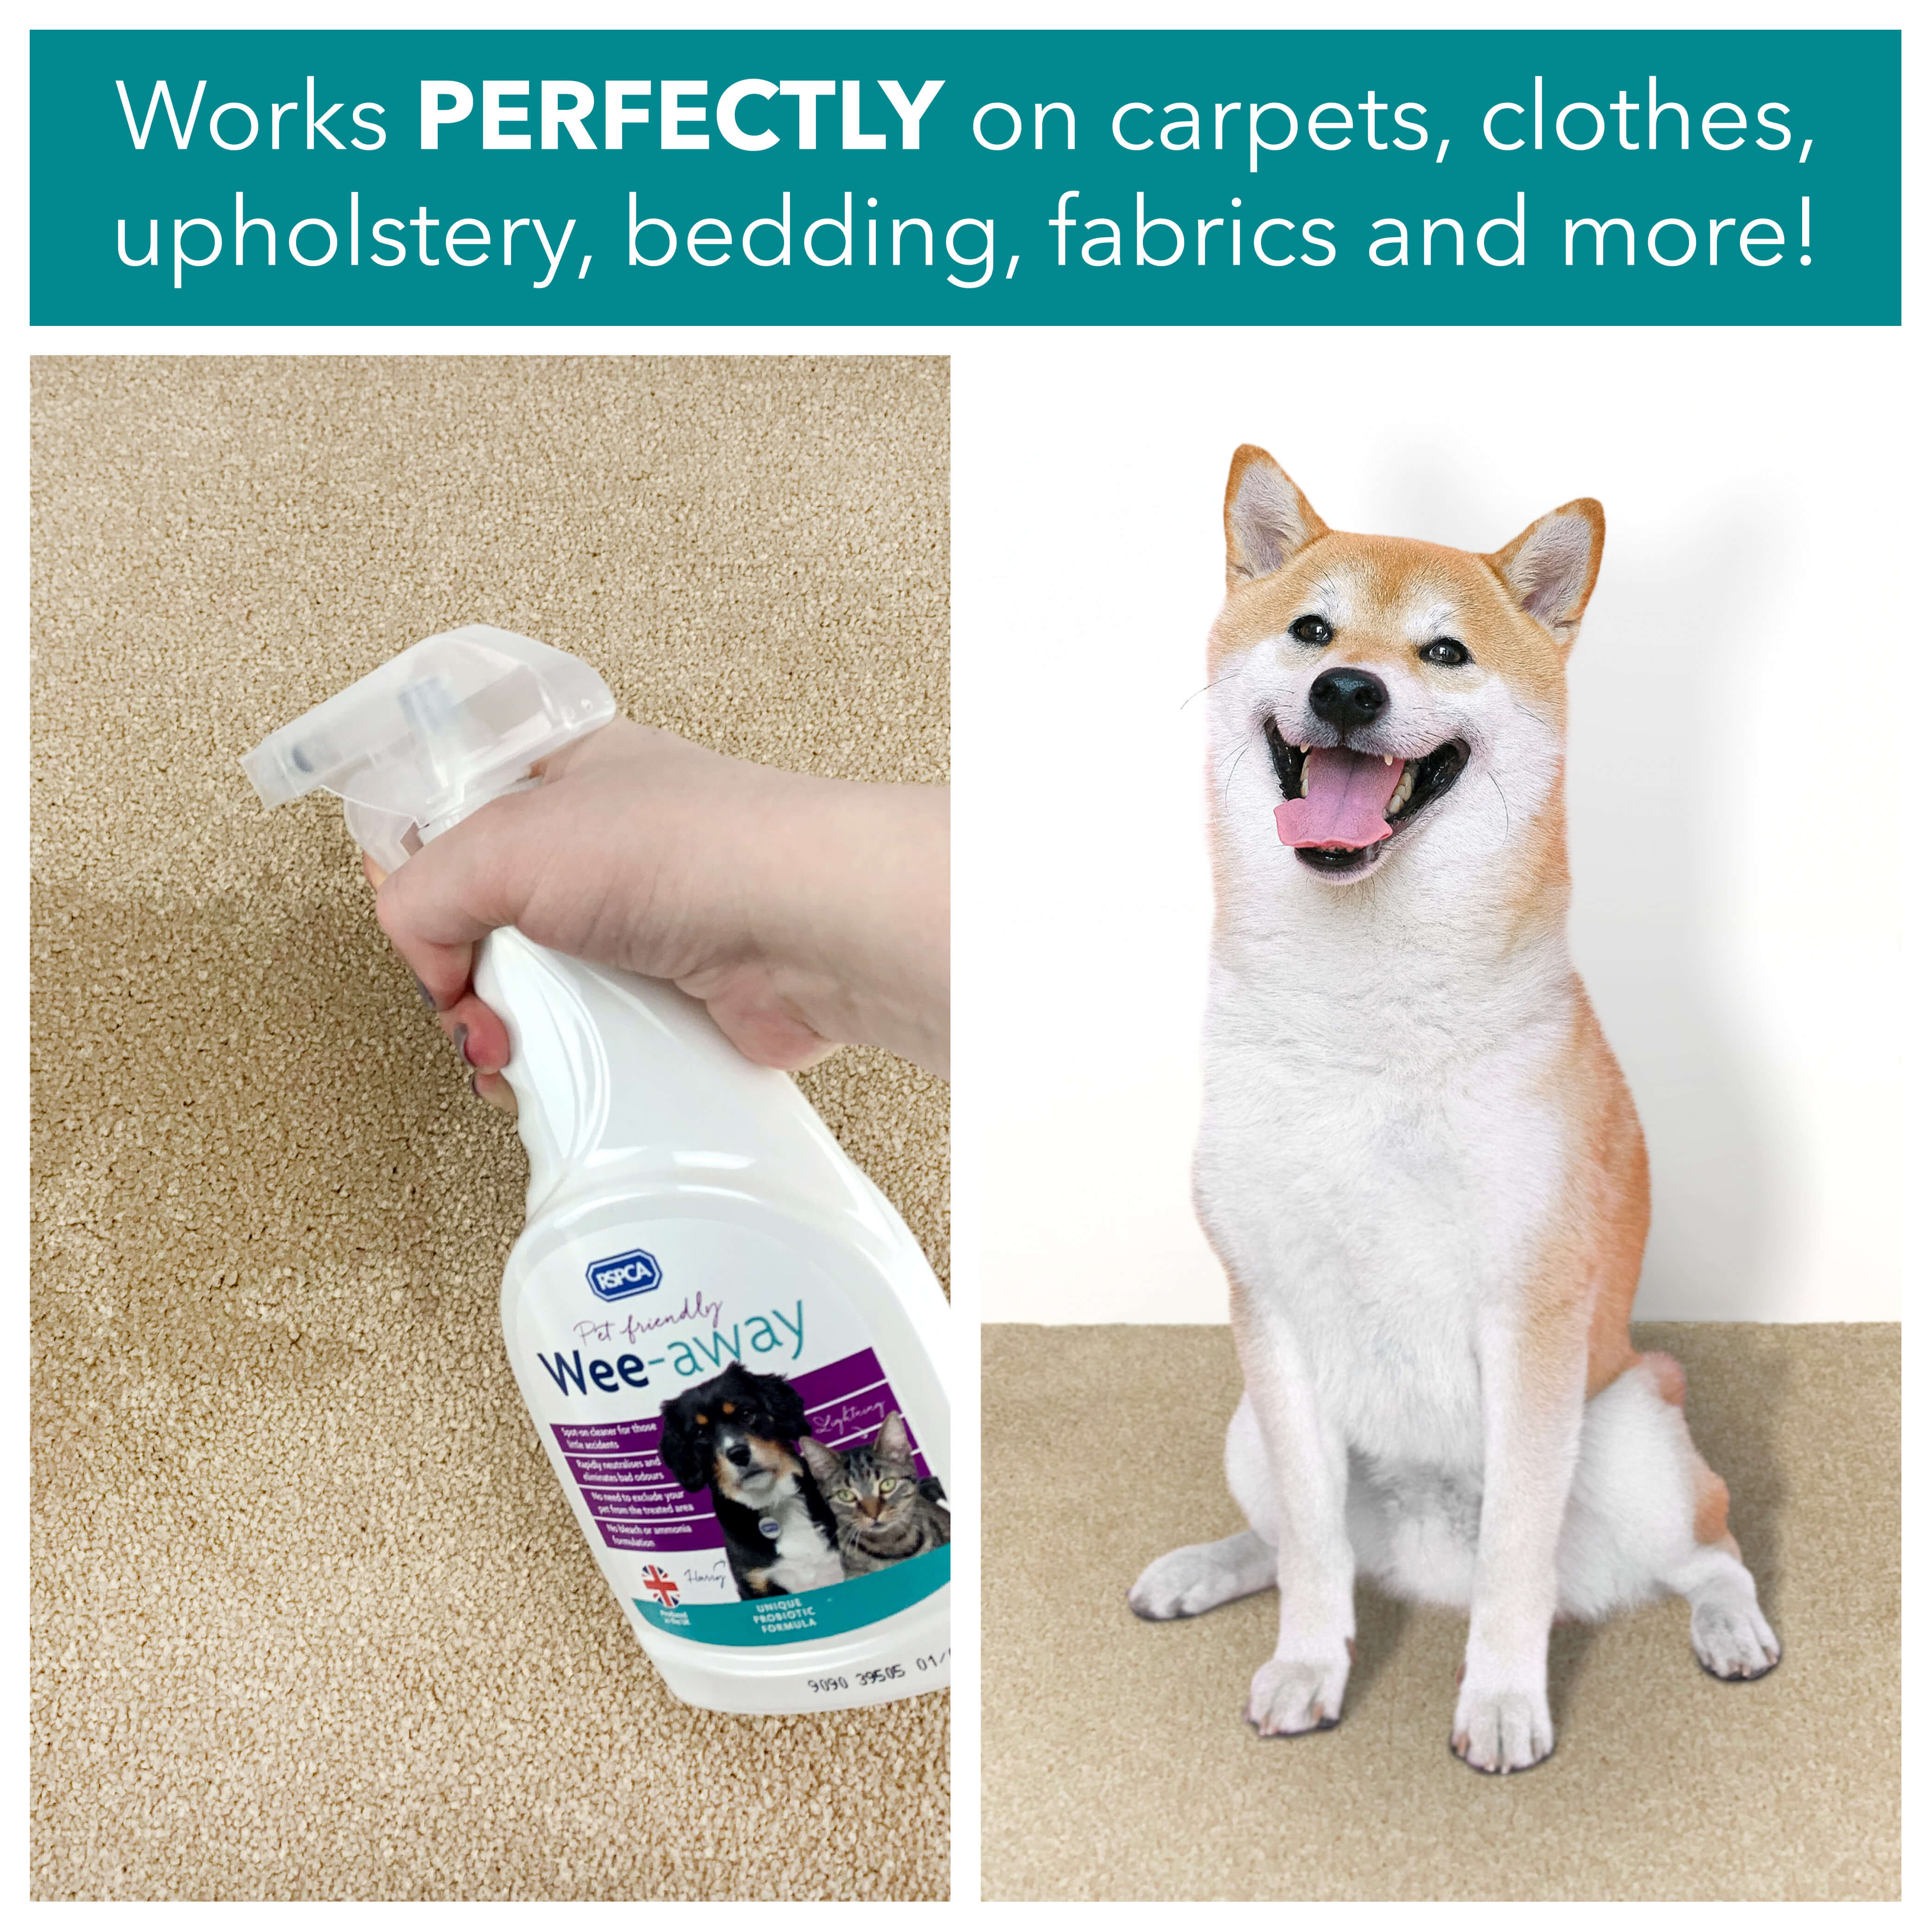 Works perfectly on carpets, clothes, upholstery, bedding, fabrics and more!